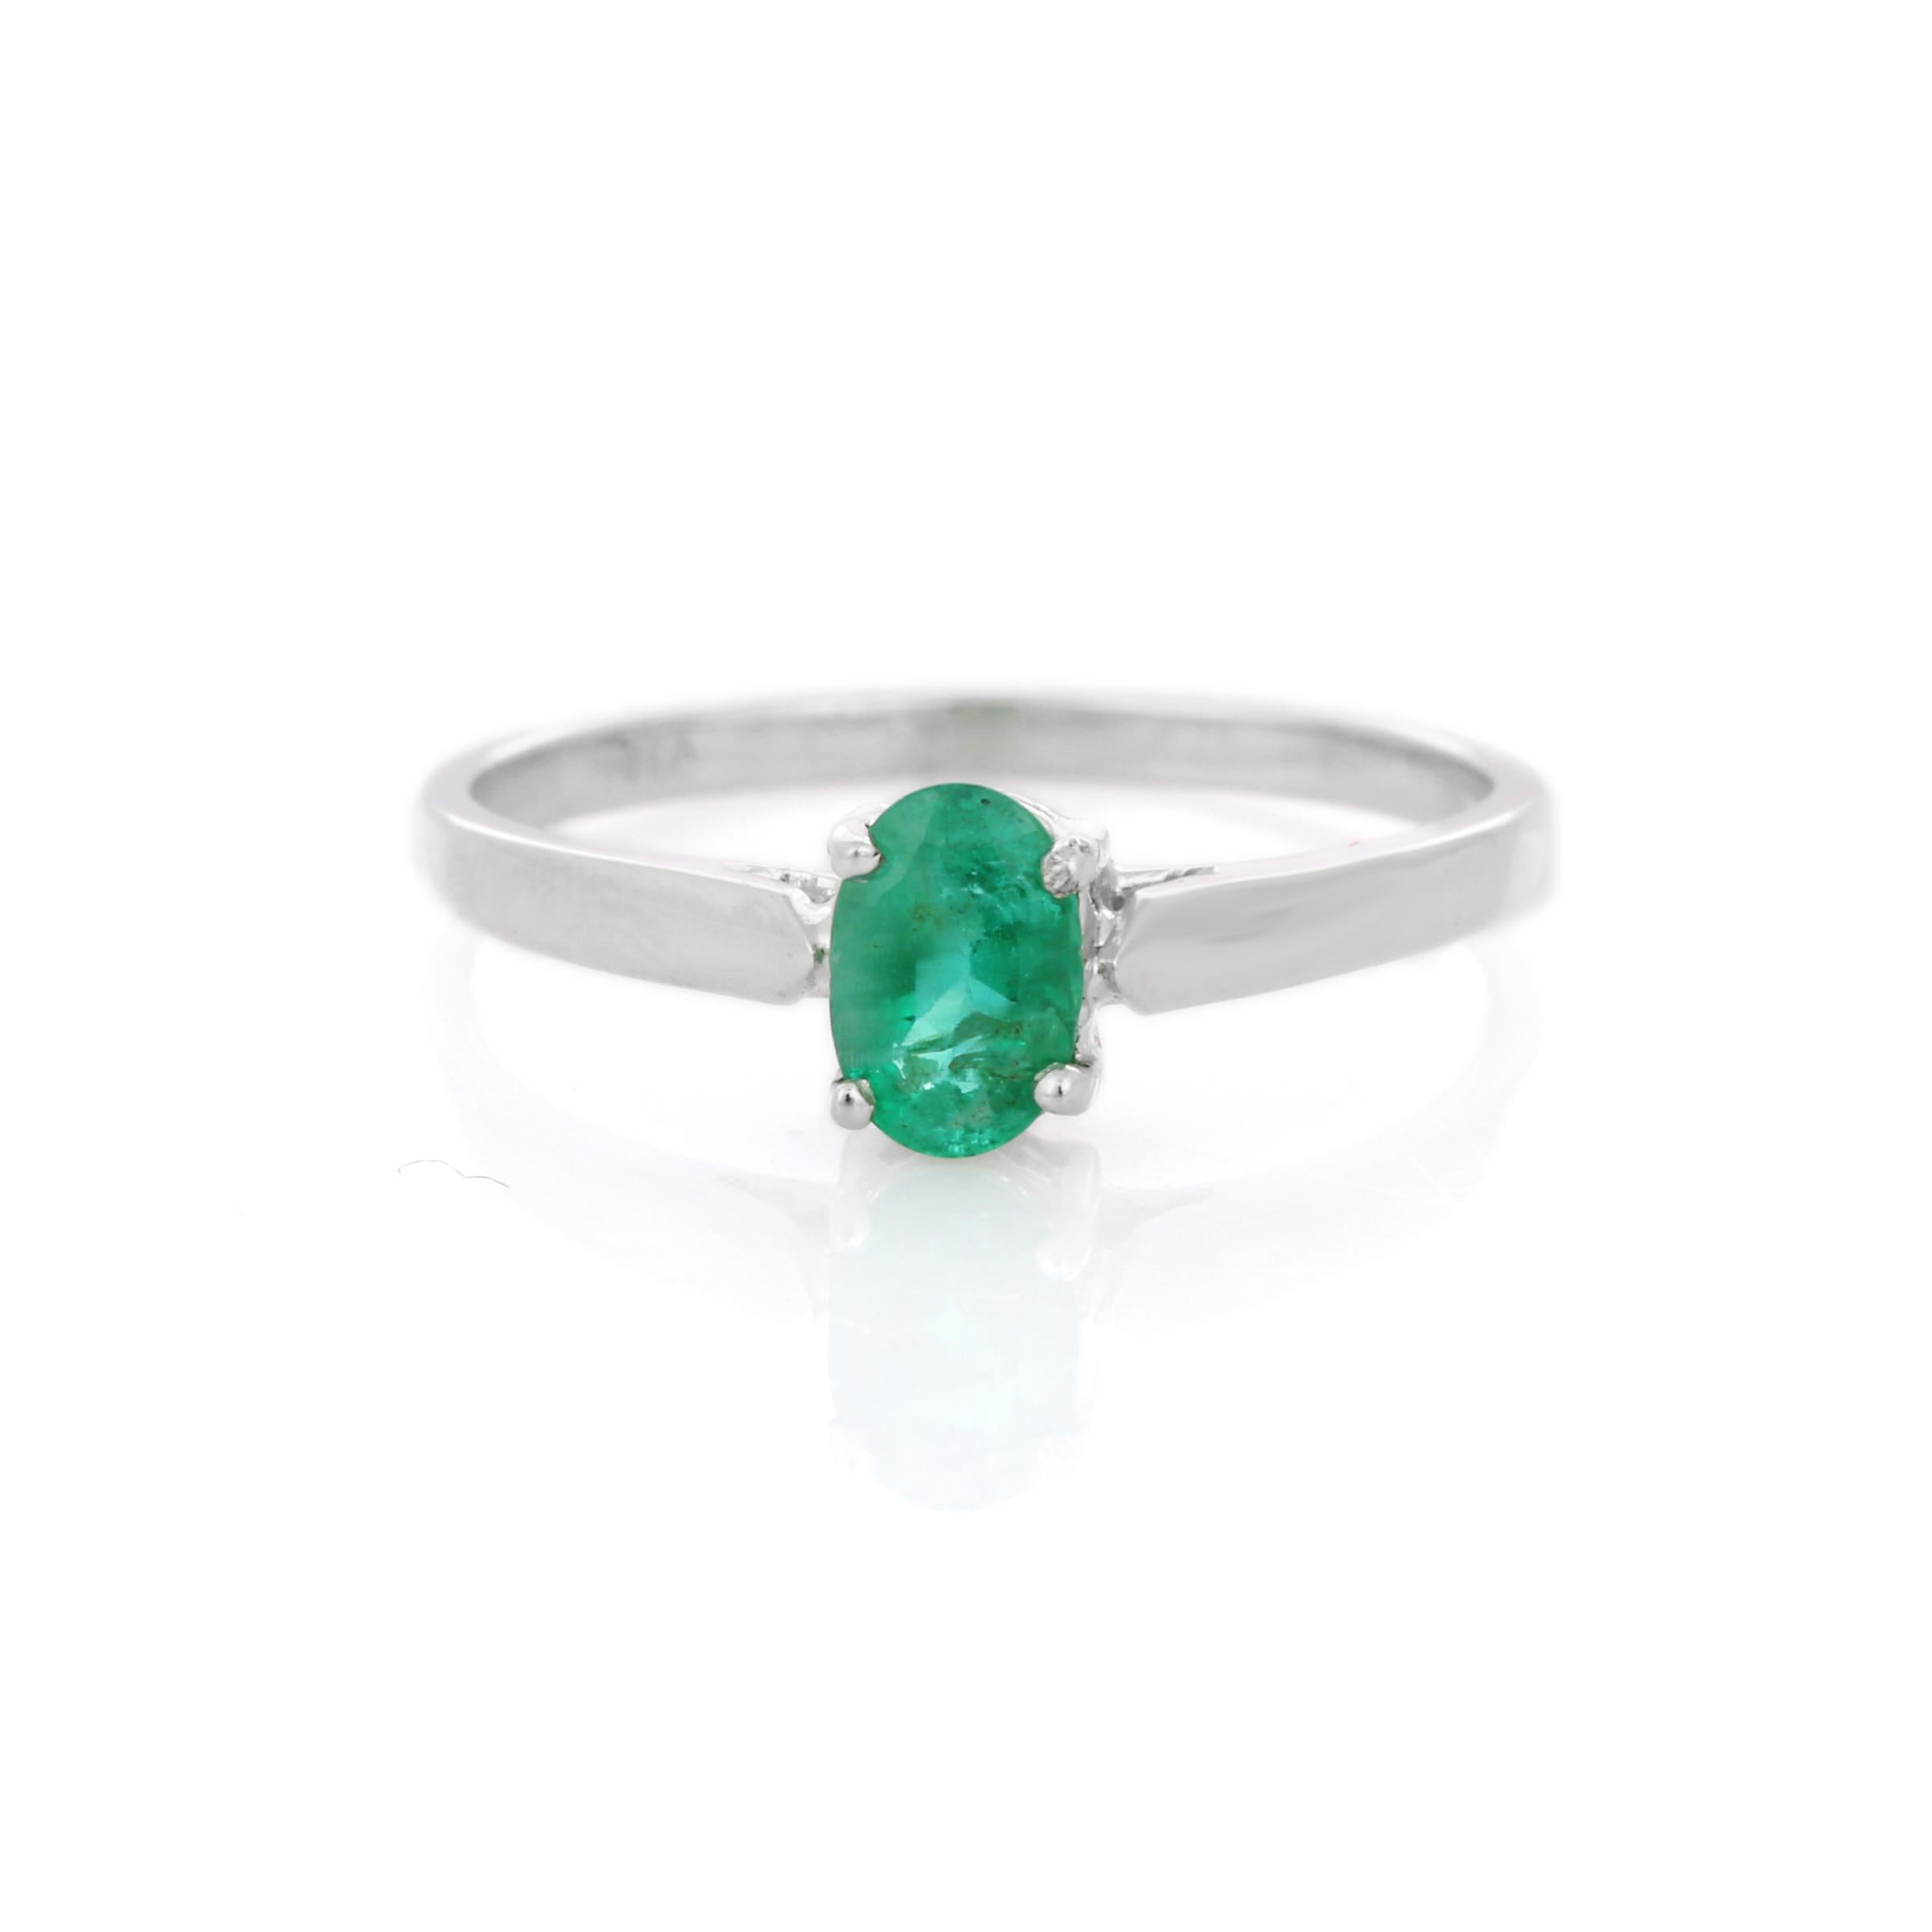 For Sale:  18K White Gold Minimalist Oval Cut Emerald Gemstone Stackable Solitaire Ring  5